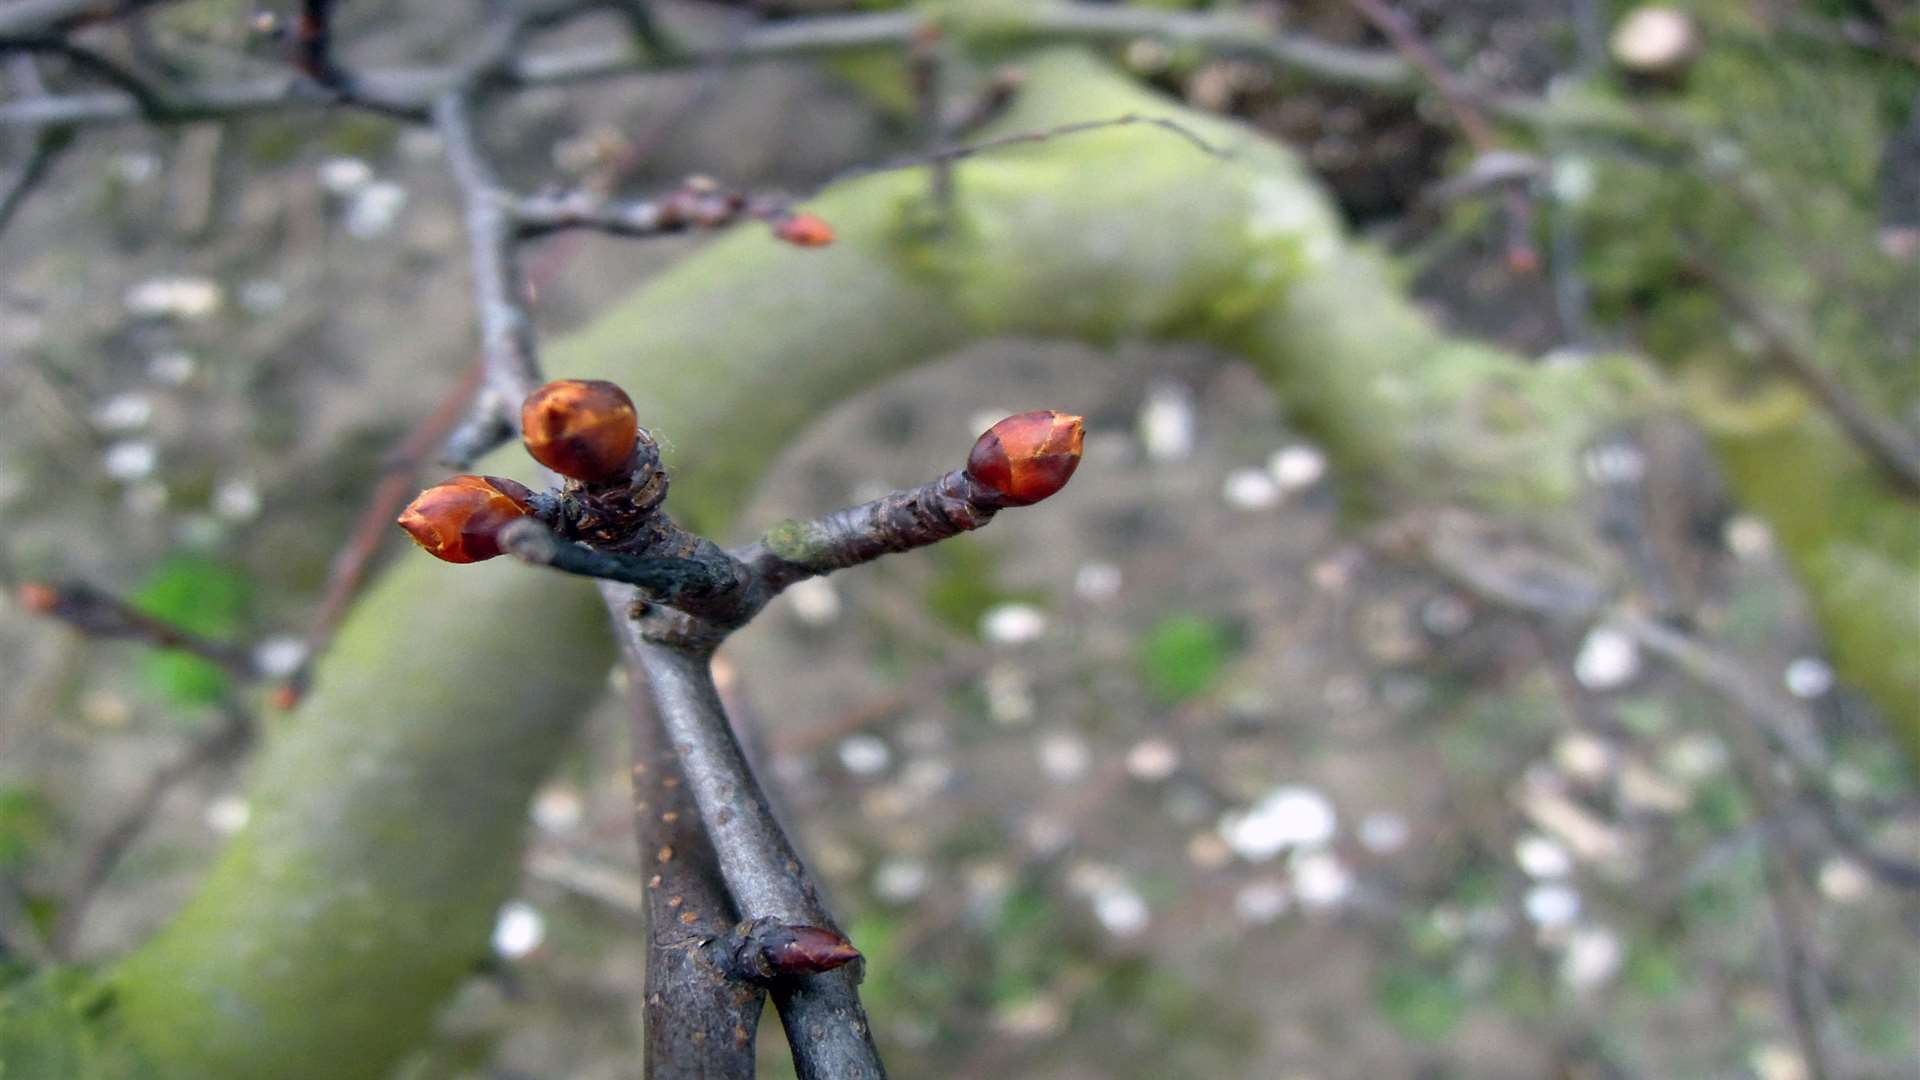 The budding blossom of the Plymouth Pear at Brogdale